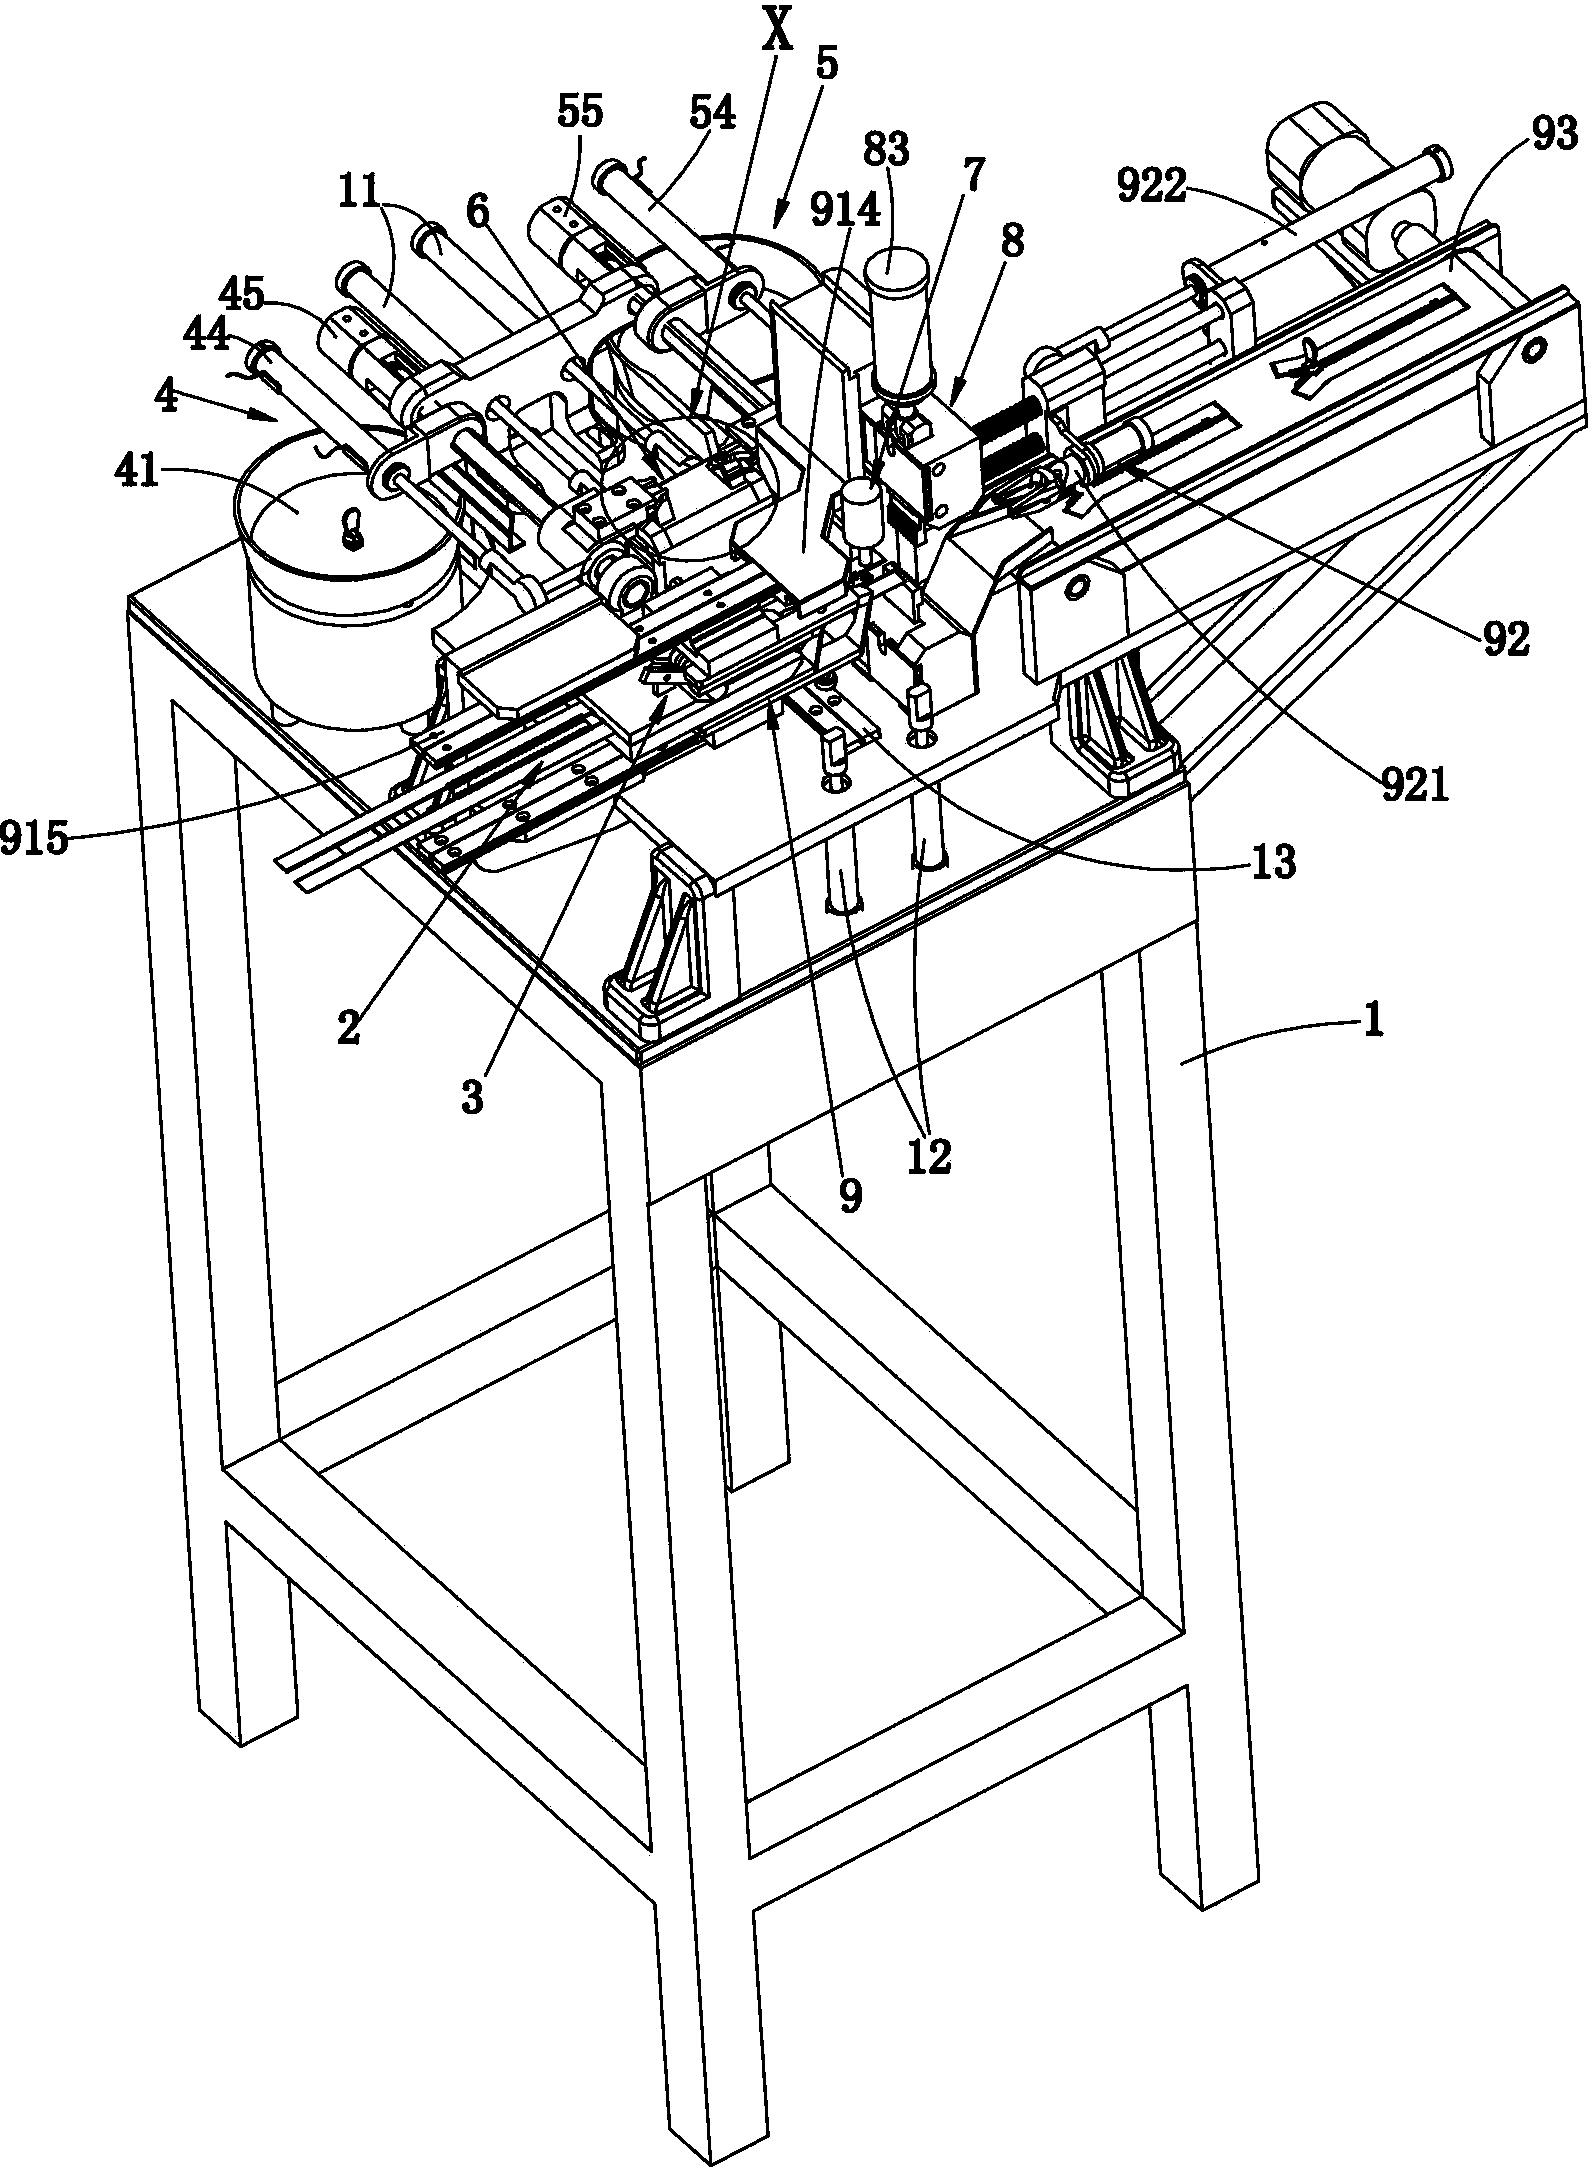 Production device for plastic steel closed zippers and zipper production method thereof